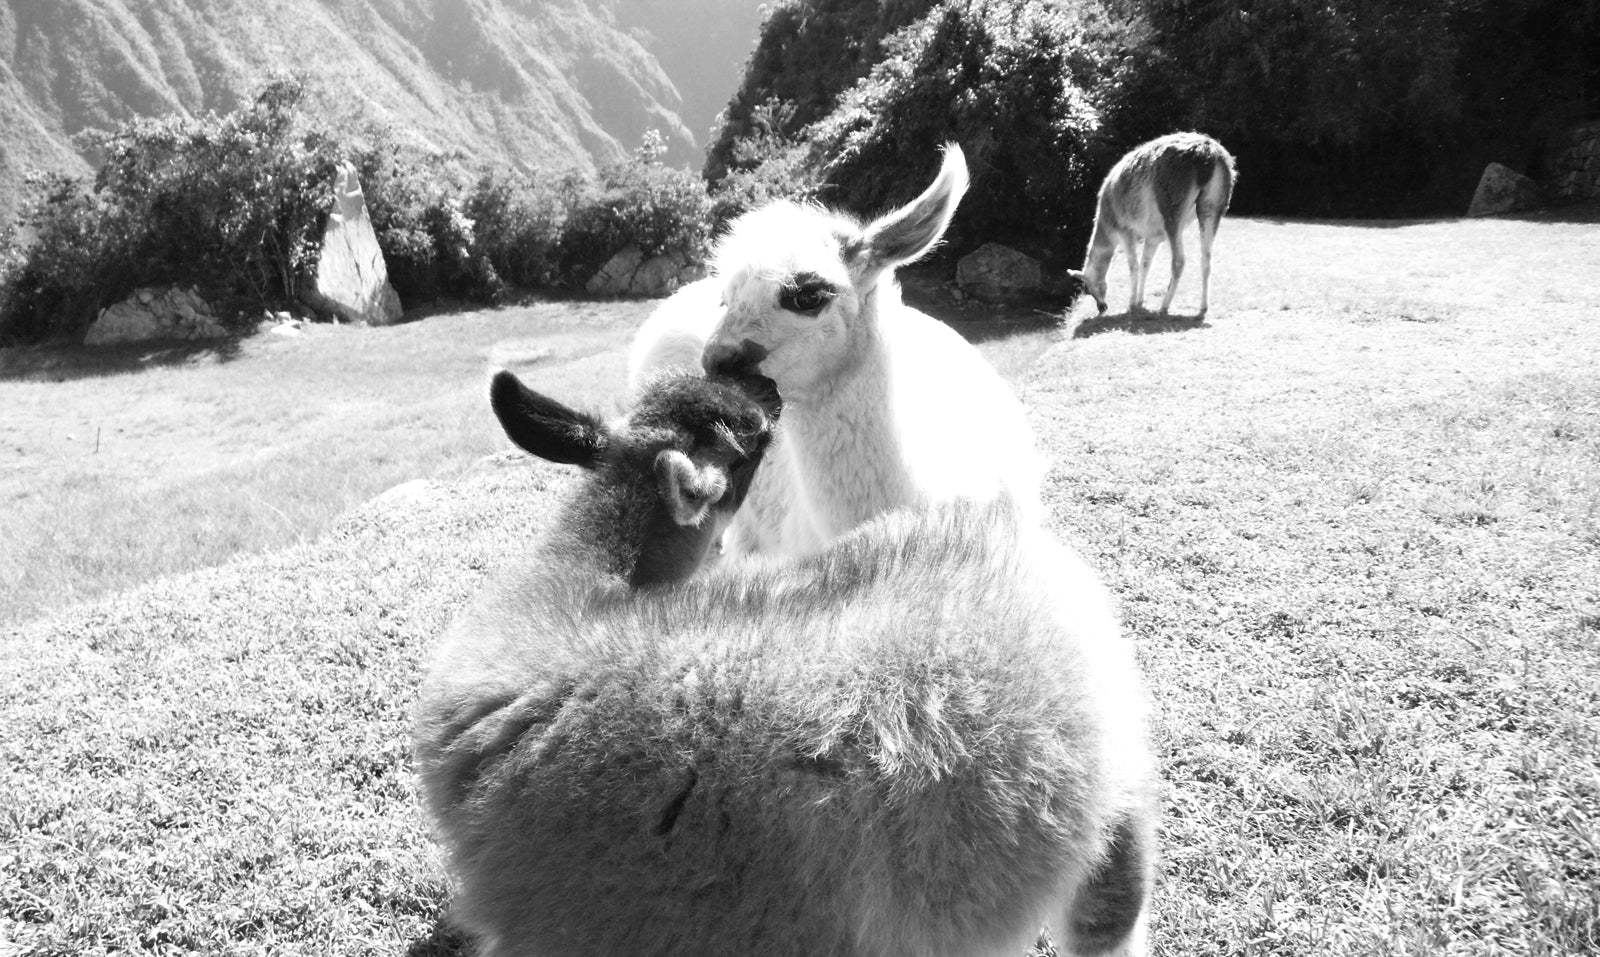 A light colored llama and a dark colored llama touching noses, with a llama grazing on brush in the back, in black and white